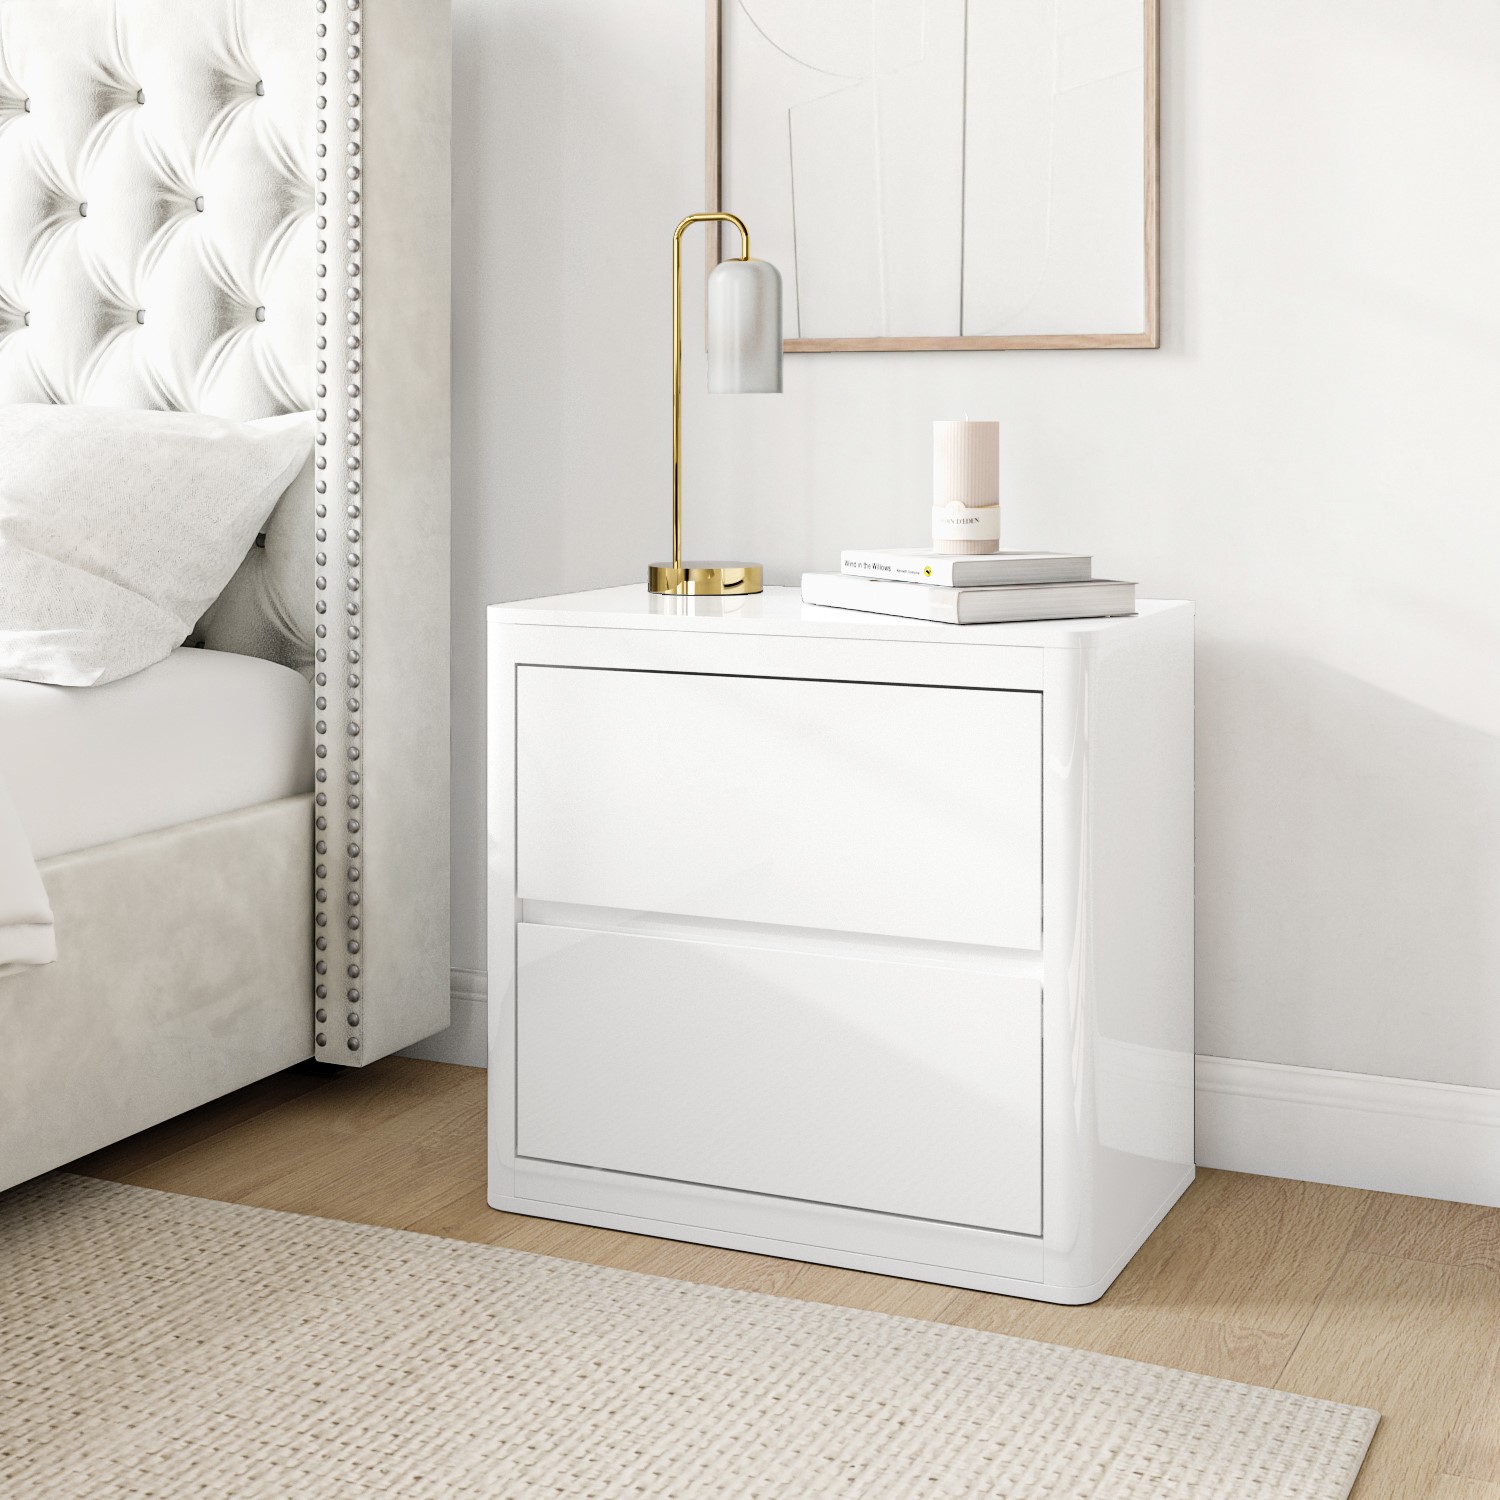 Why Oak Bedside Cabinets Are Best for Classic-Contemporary Bedrooms